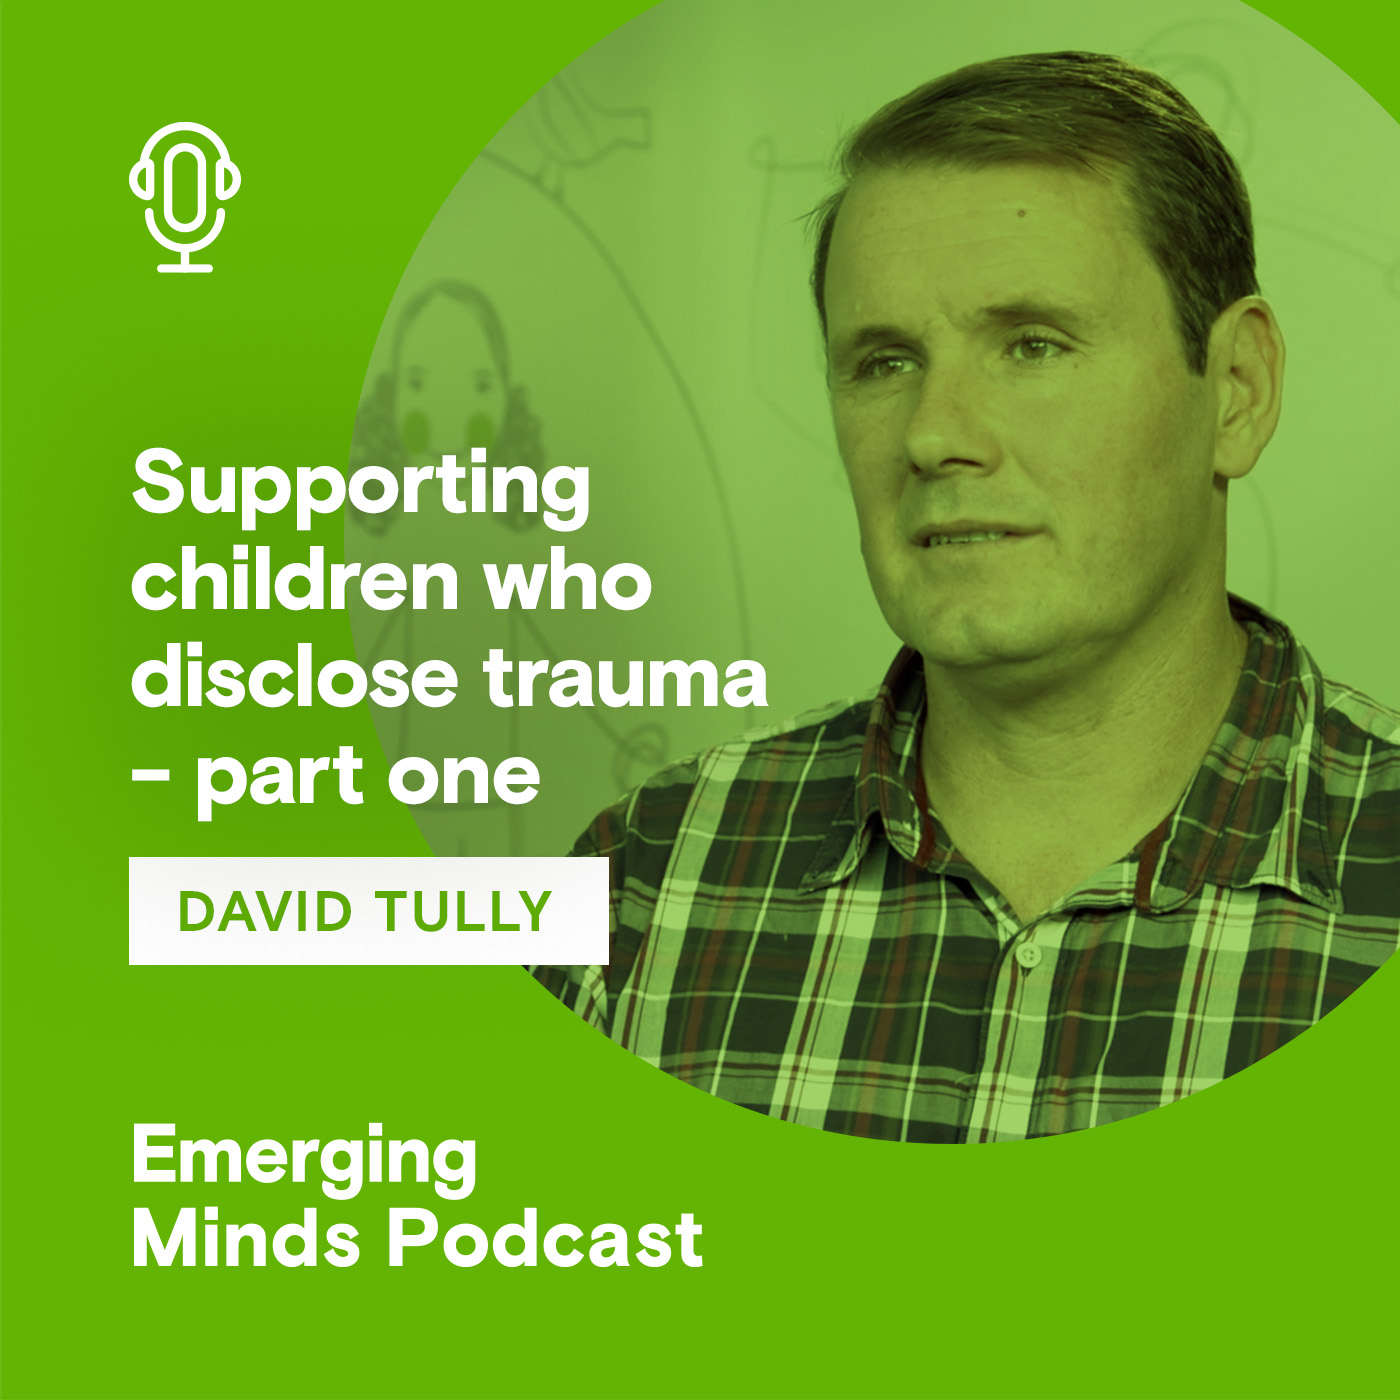 Supporting children who disclose trauma - part one